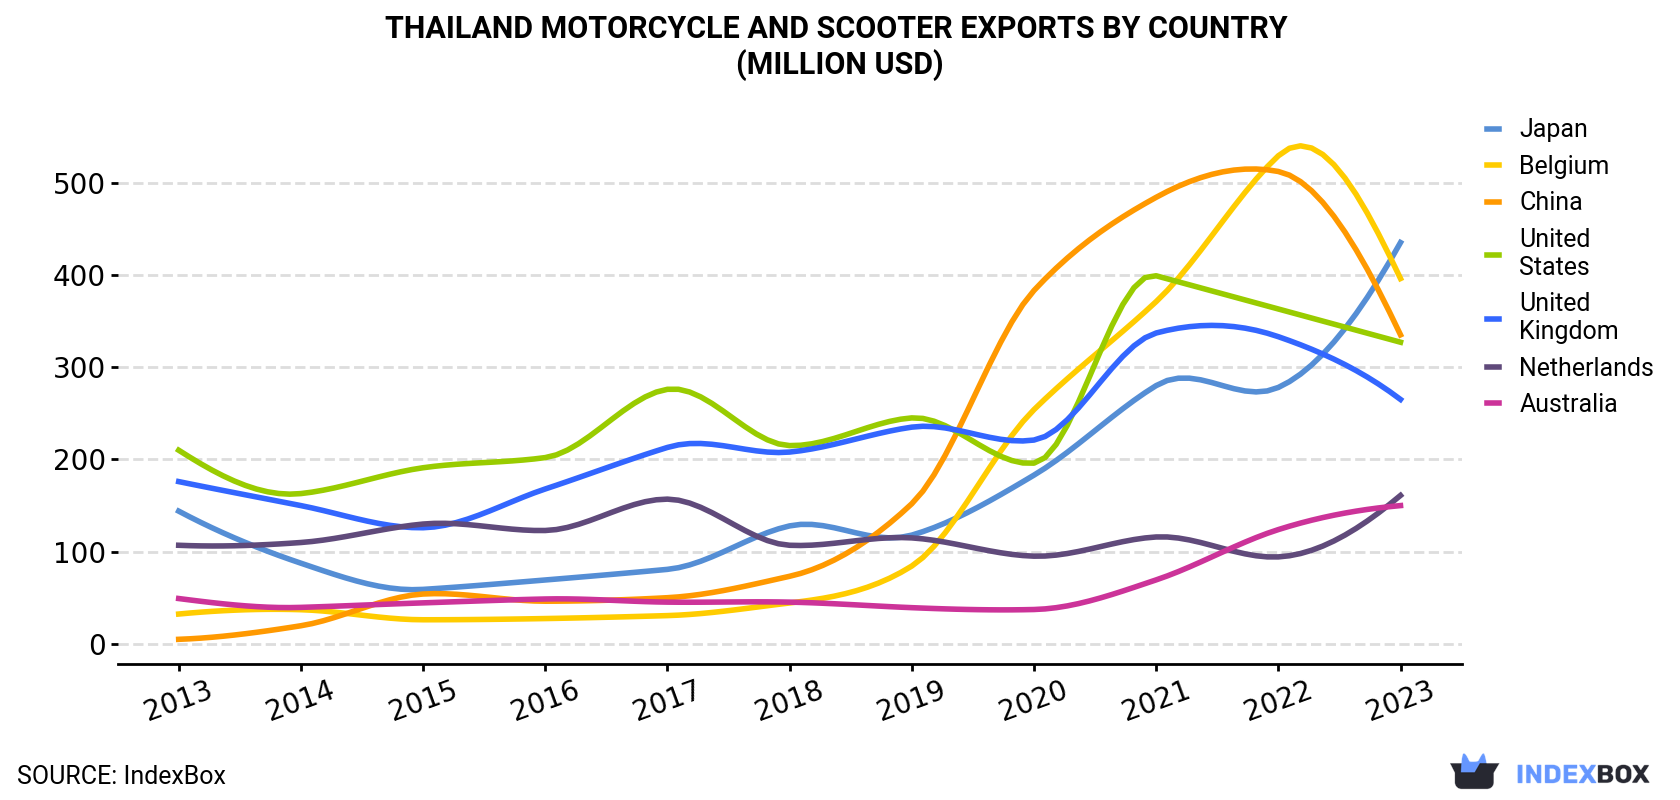 Thailand Motorcycle and Scooter Exports By Country (Million USD)